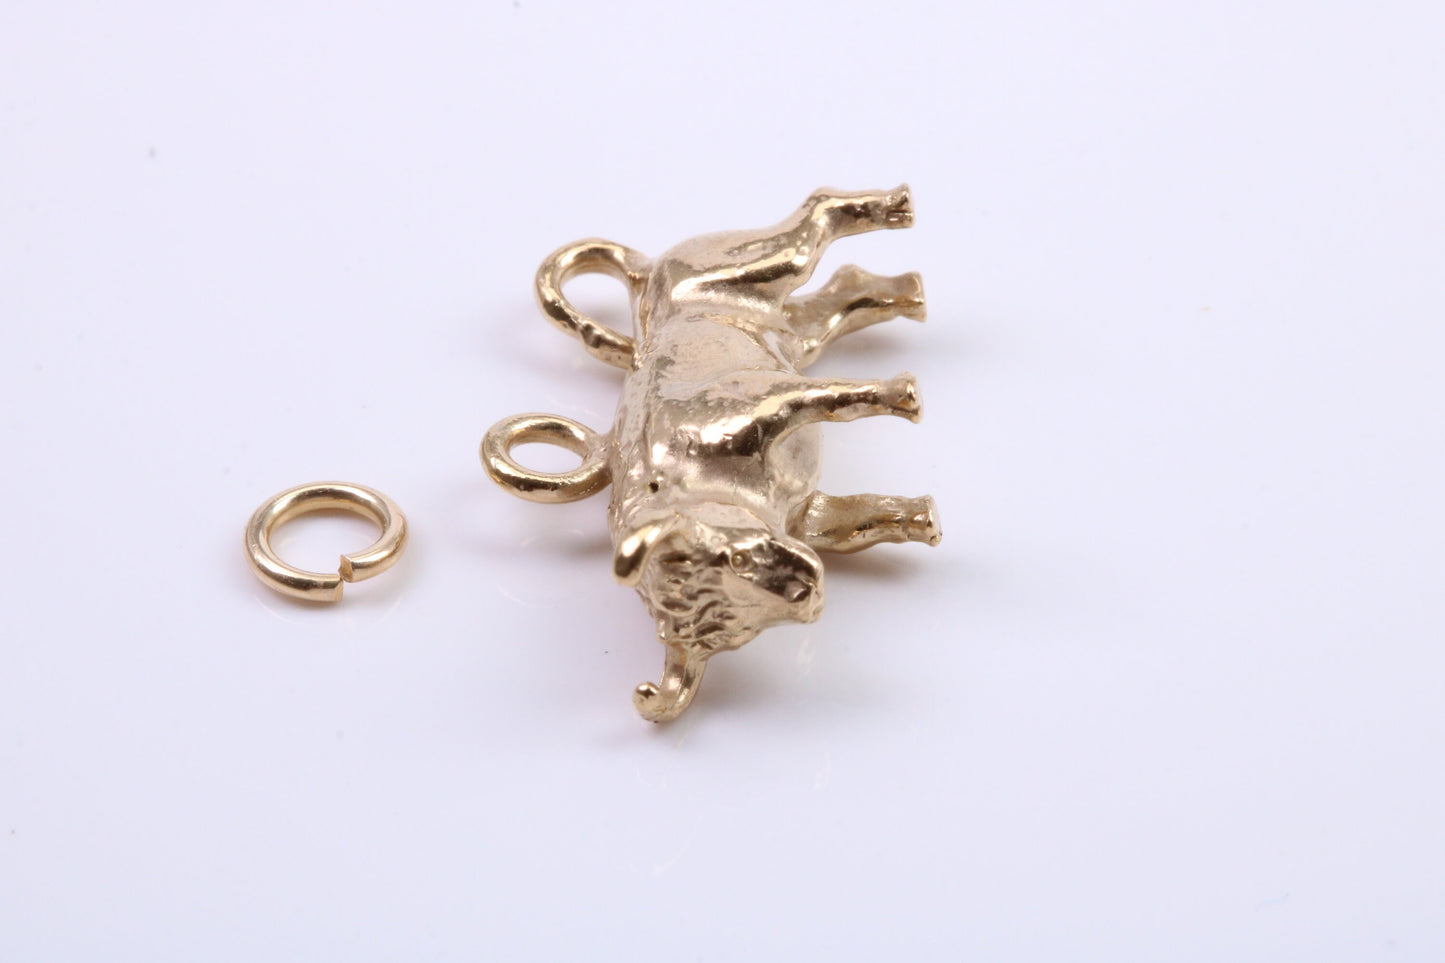 Taurus Zodiac Sign Charm, Traditional Charm, Made from Solid 9ct Yellow Gold, British Hallmarked, Complete with Attachment Link